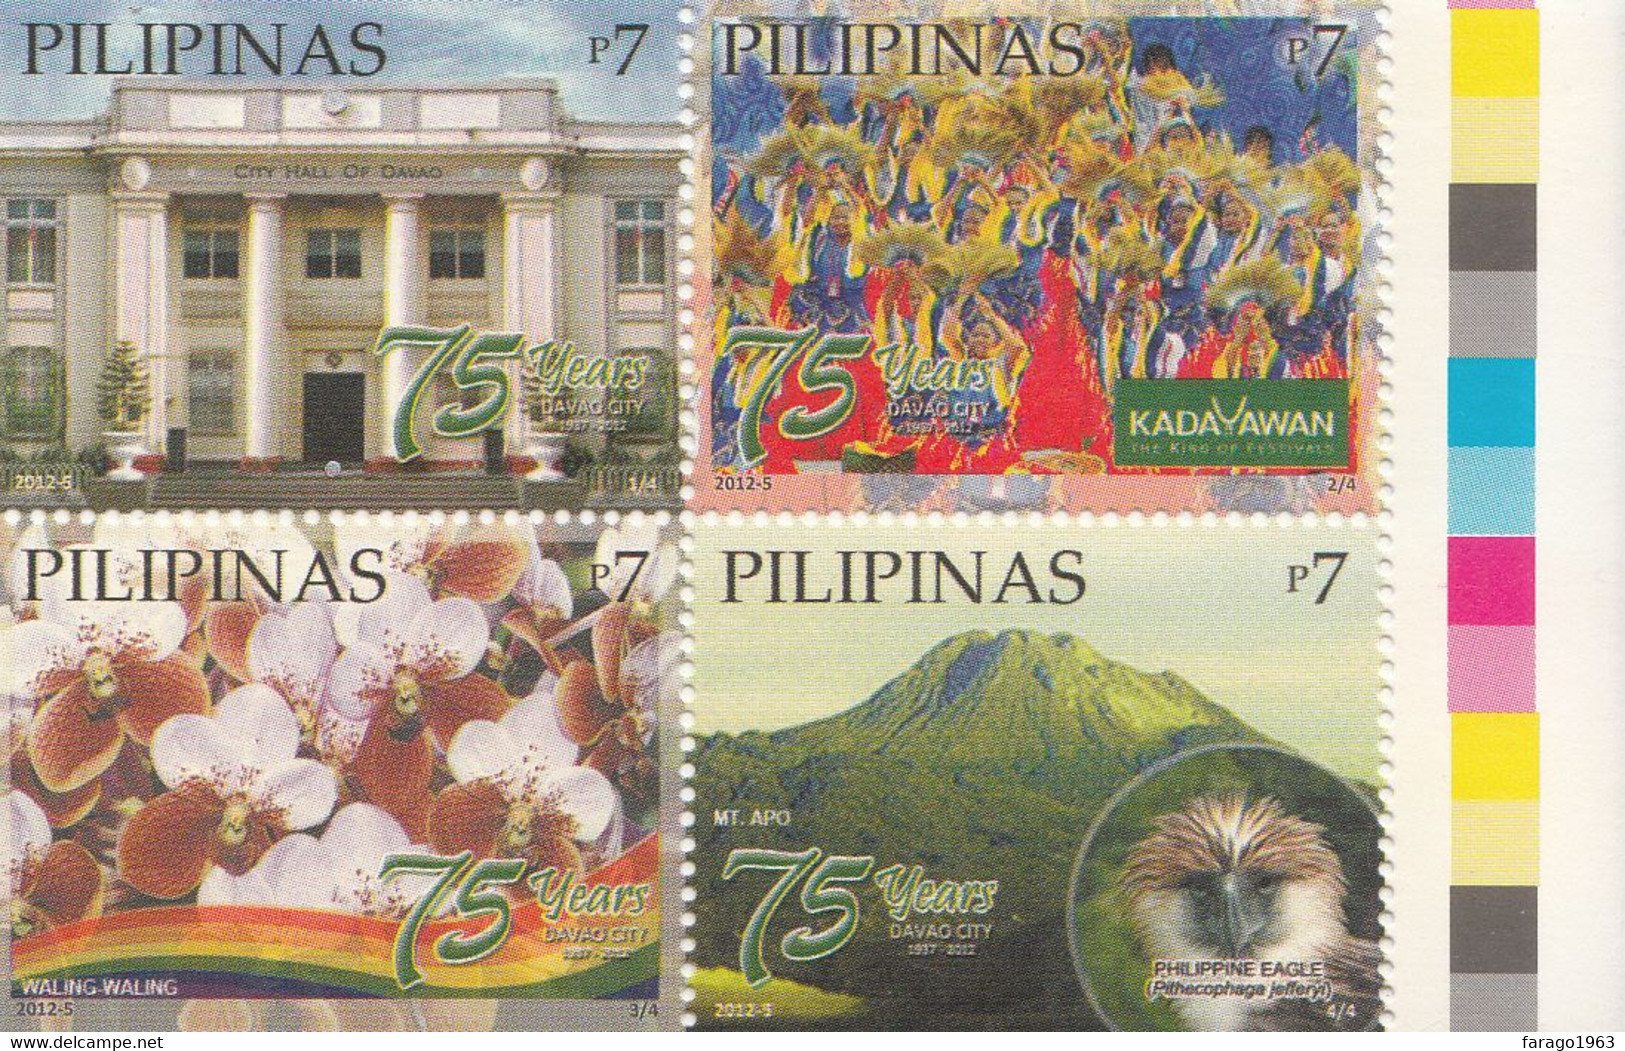 2012 Philippines Davao Orchids Mountains Eagle Birds Complete Block Of 4 MNH - Philippines